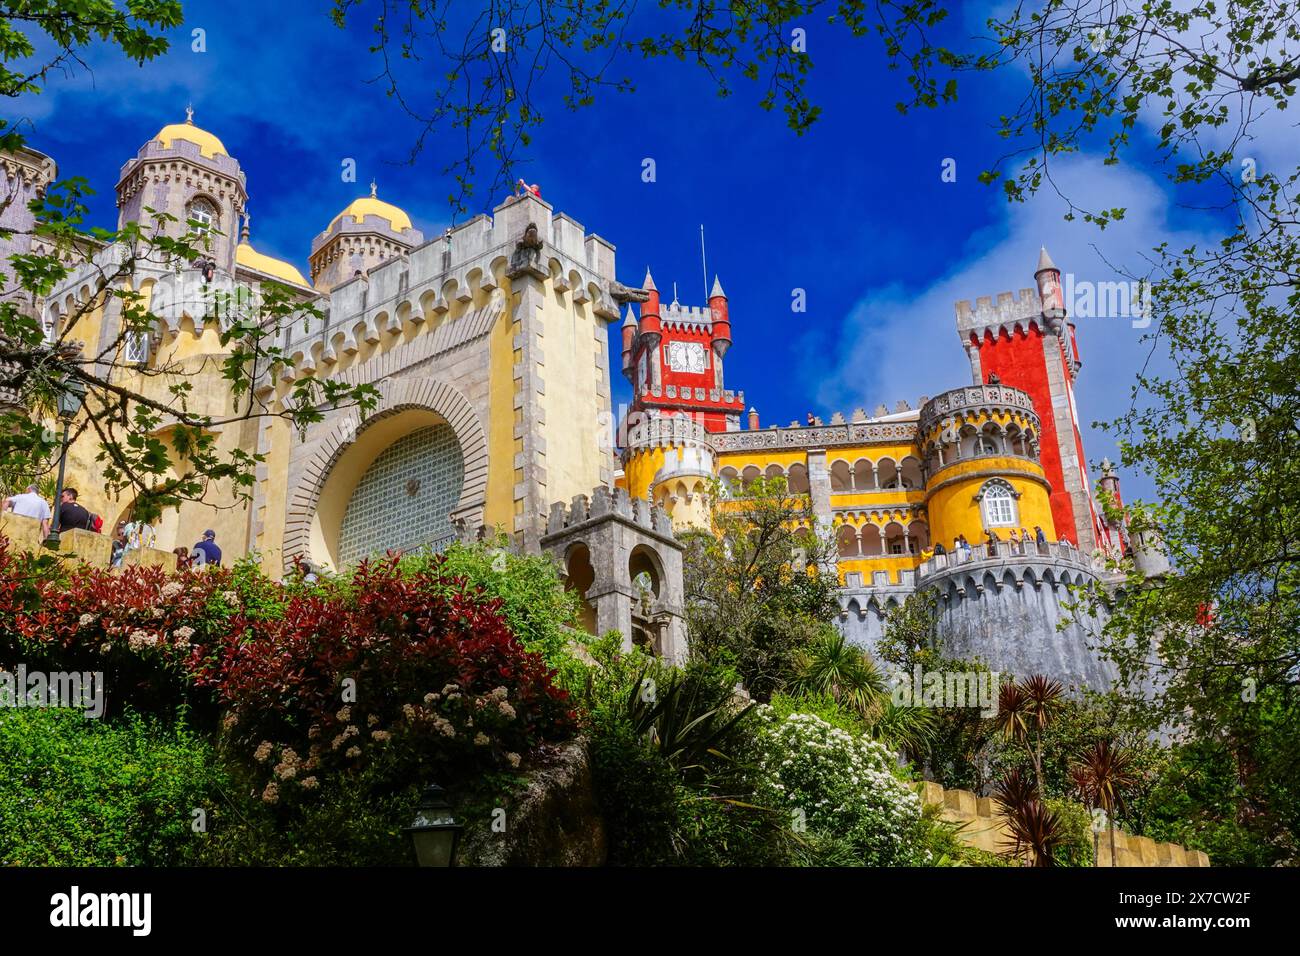 The Pena Palace or Palácio da Pena historic palace castle viewed from the Coach Yard in Sintra, Portugal. The fairytale castle palace is considered one of the finest examples of 19th century Portuguese Romanticism architecture in the world. Stock Photo